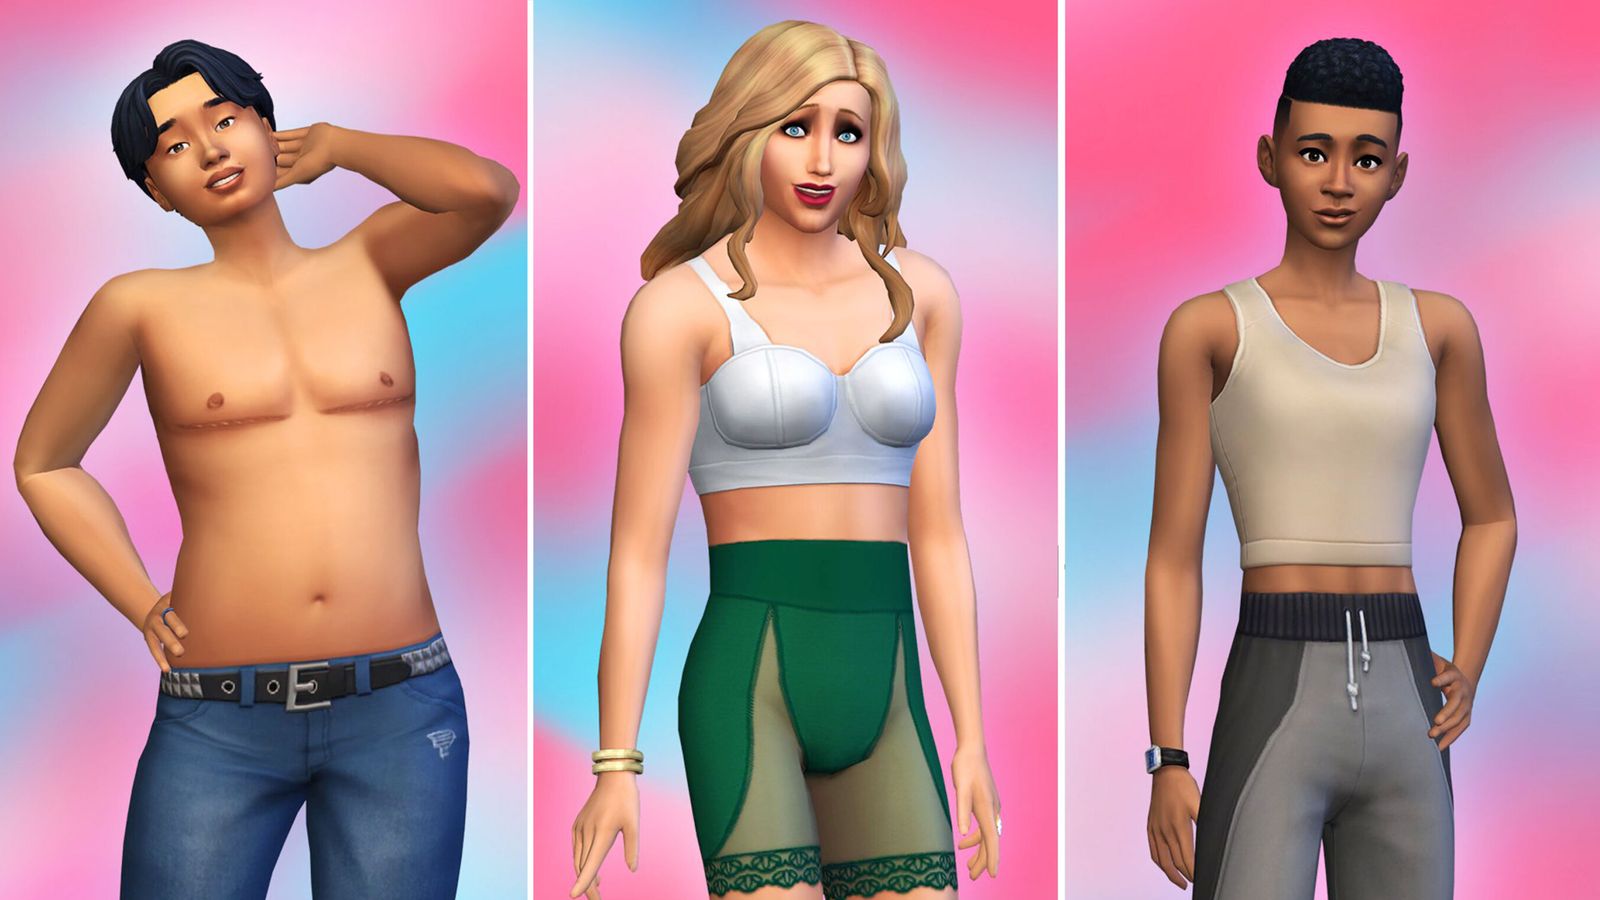 The Sims 4: Life simulation video game adds top surgery scars, hearing aids and binders to character choices